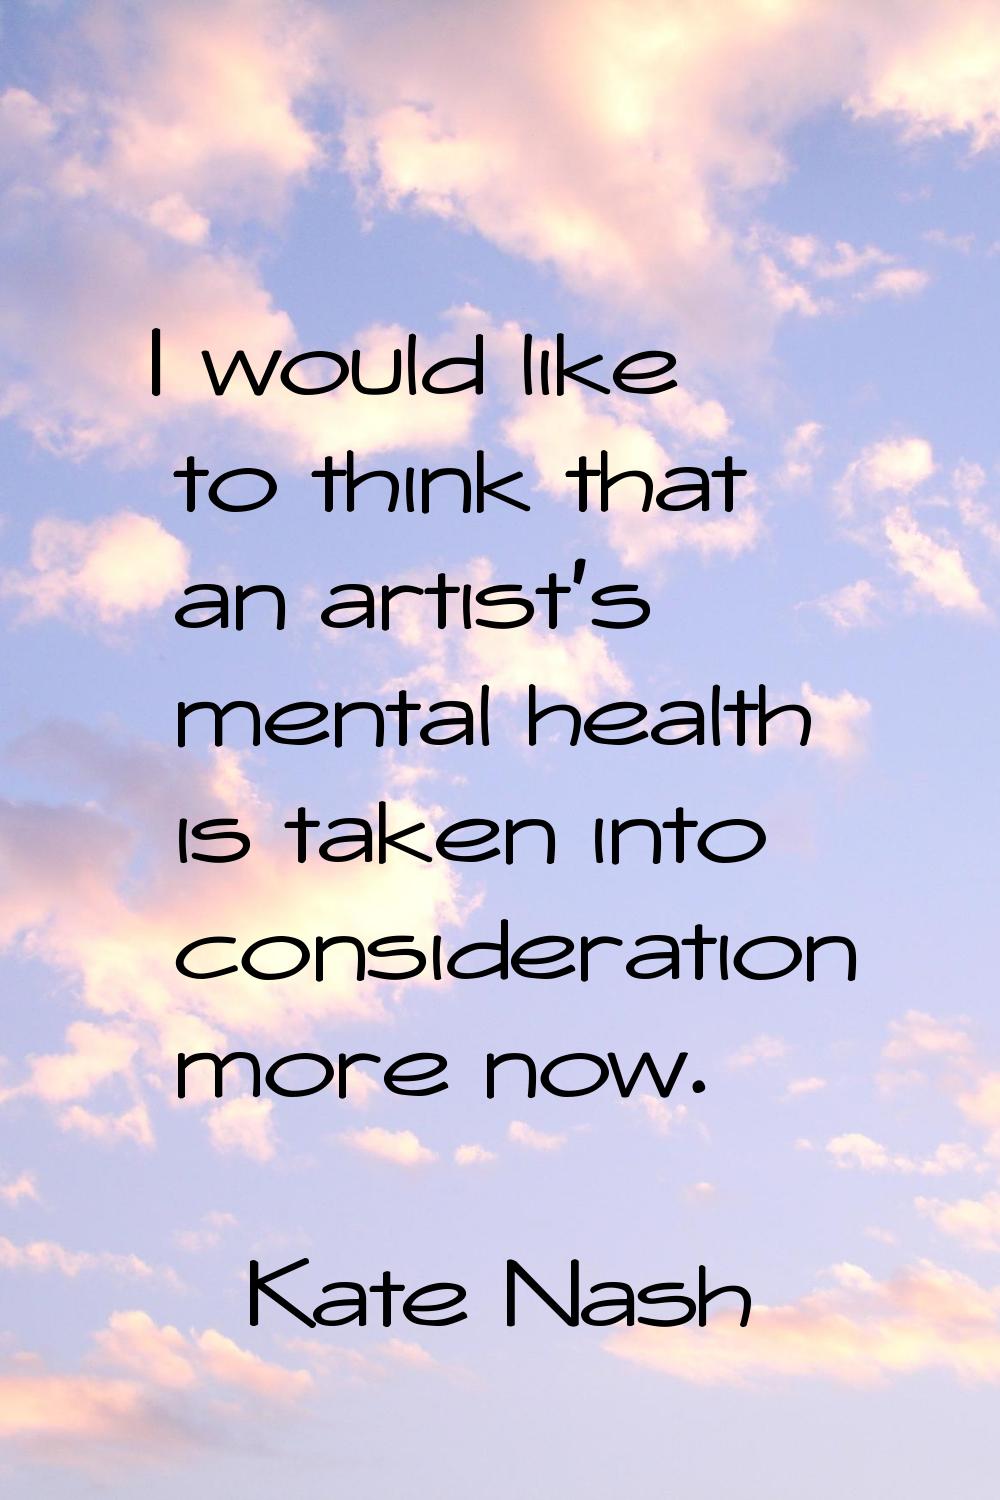 I would like to think that an artist's mental health is taken into consideration more now.